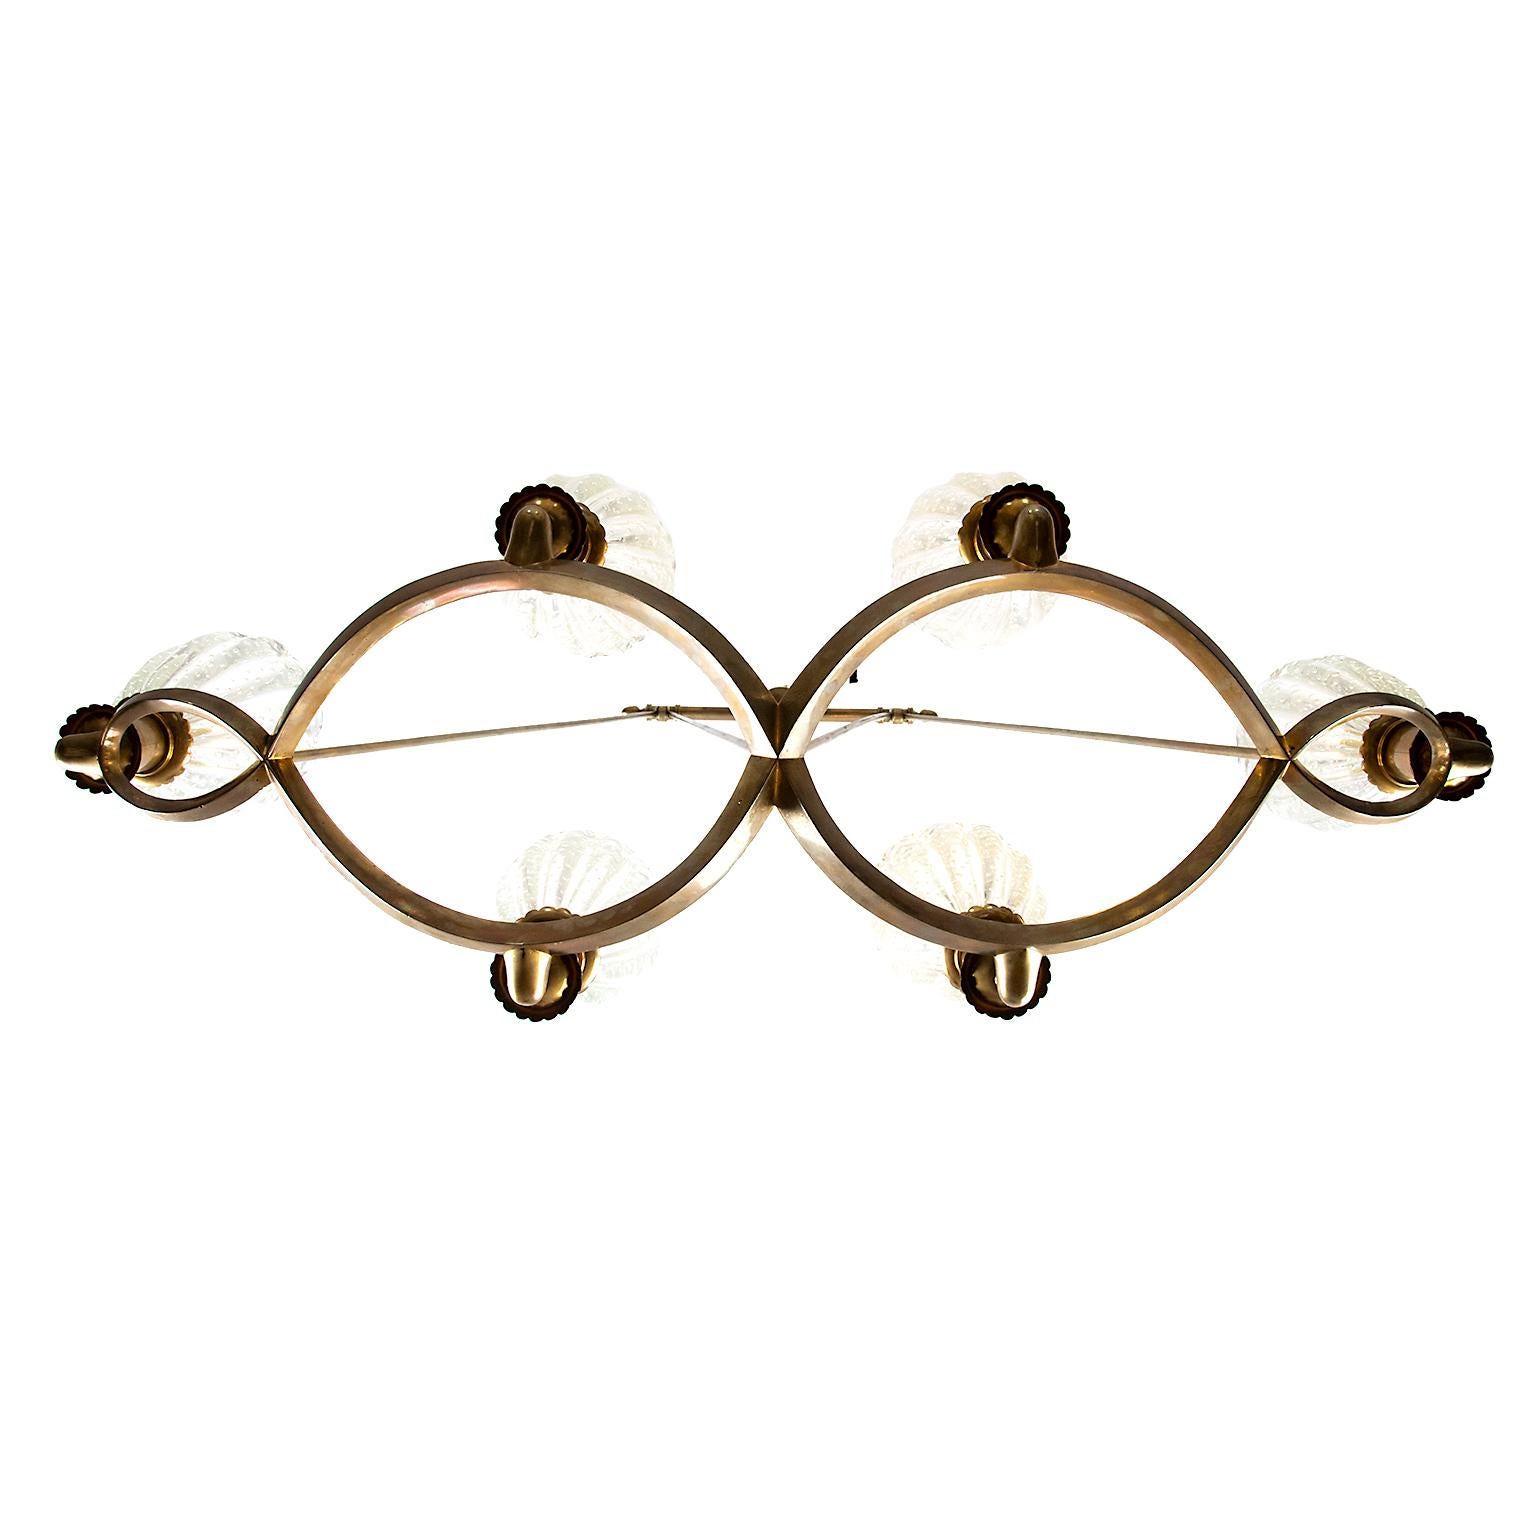 This long and elegant six light fixture is stunning with its thick clear glass bubble inclusion Murano shades and fine oval bronze rings suspended by brass rods.
Wired for North America.